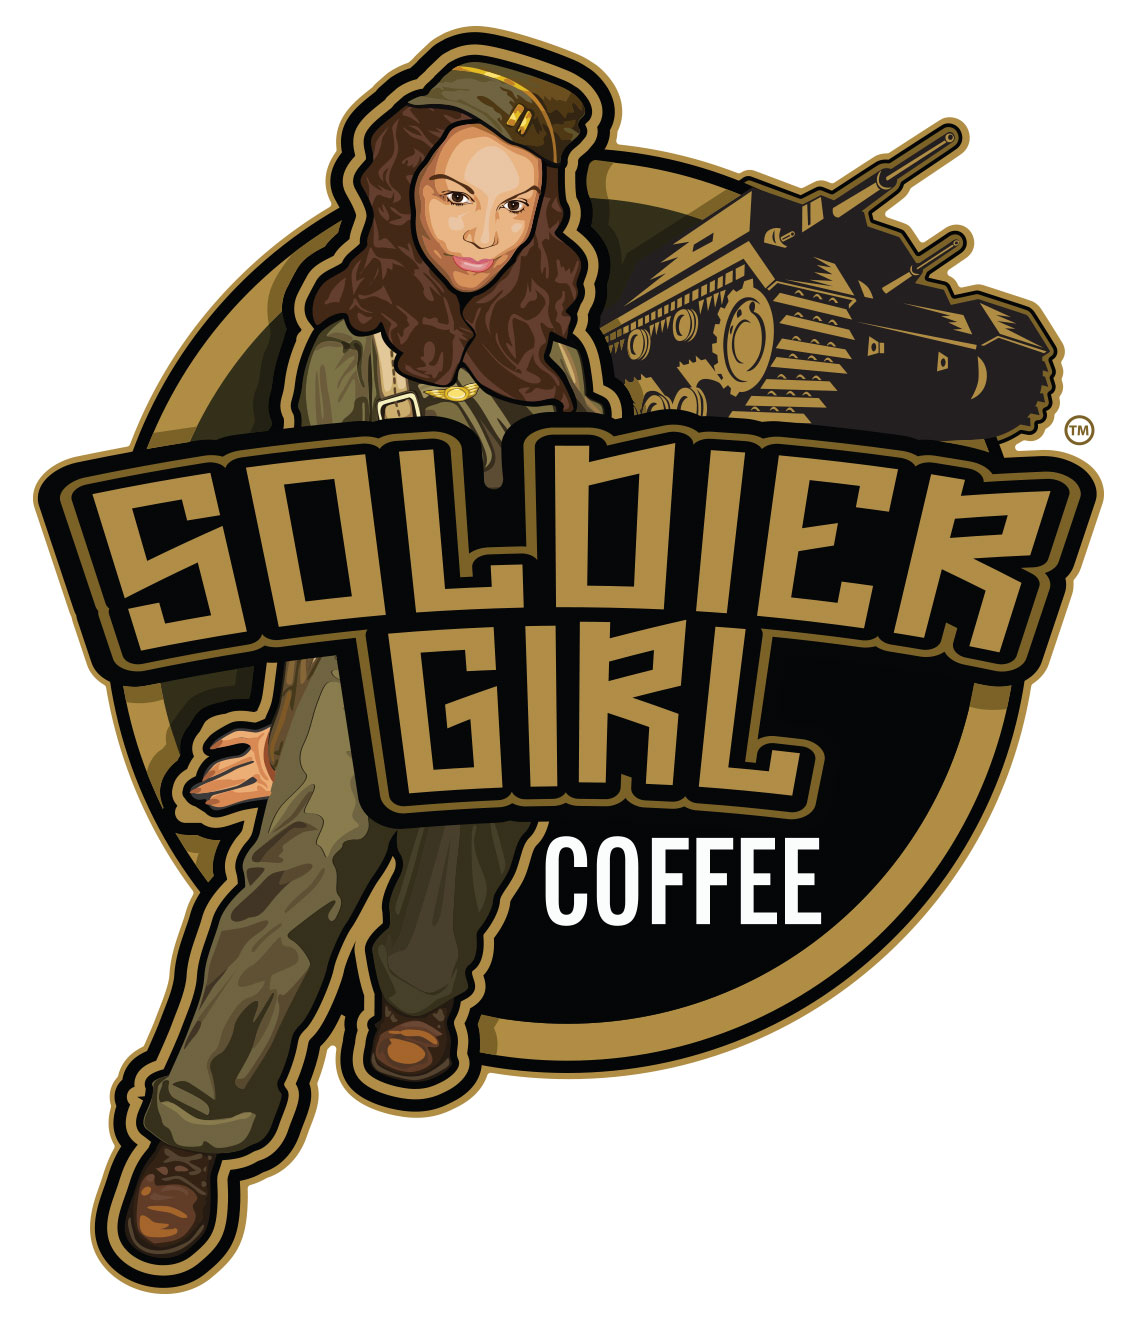 Soldier Girl Coffee Soldier Girl Coffee